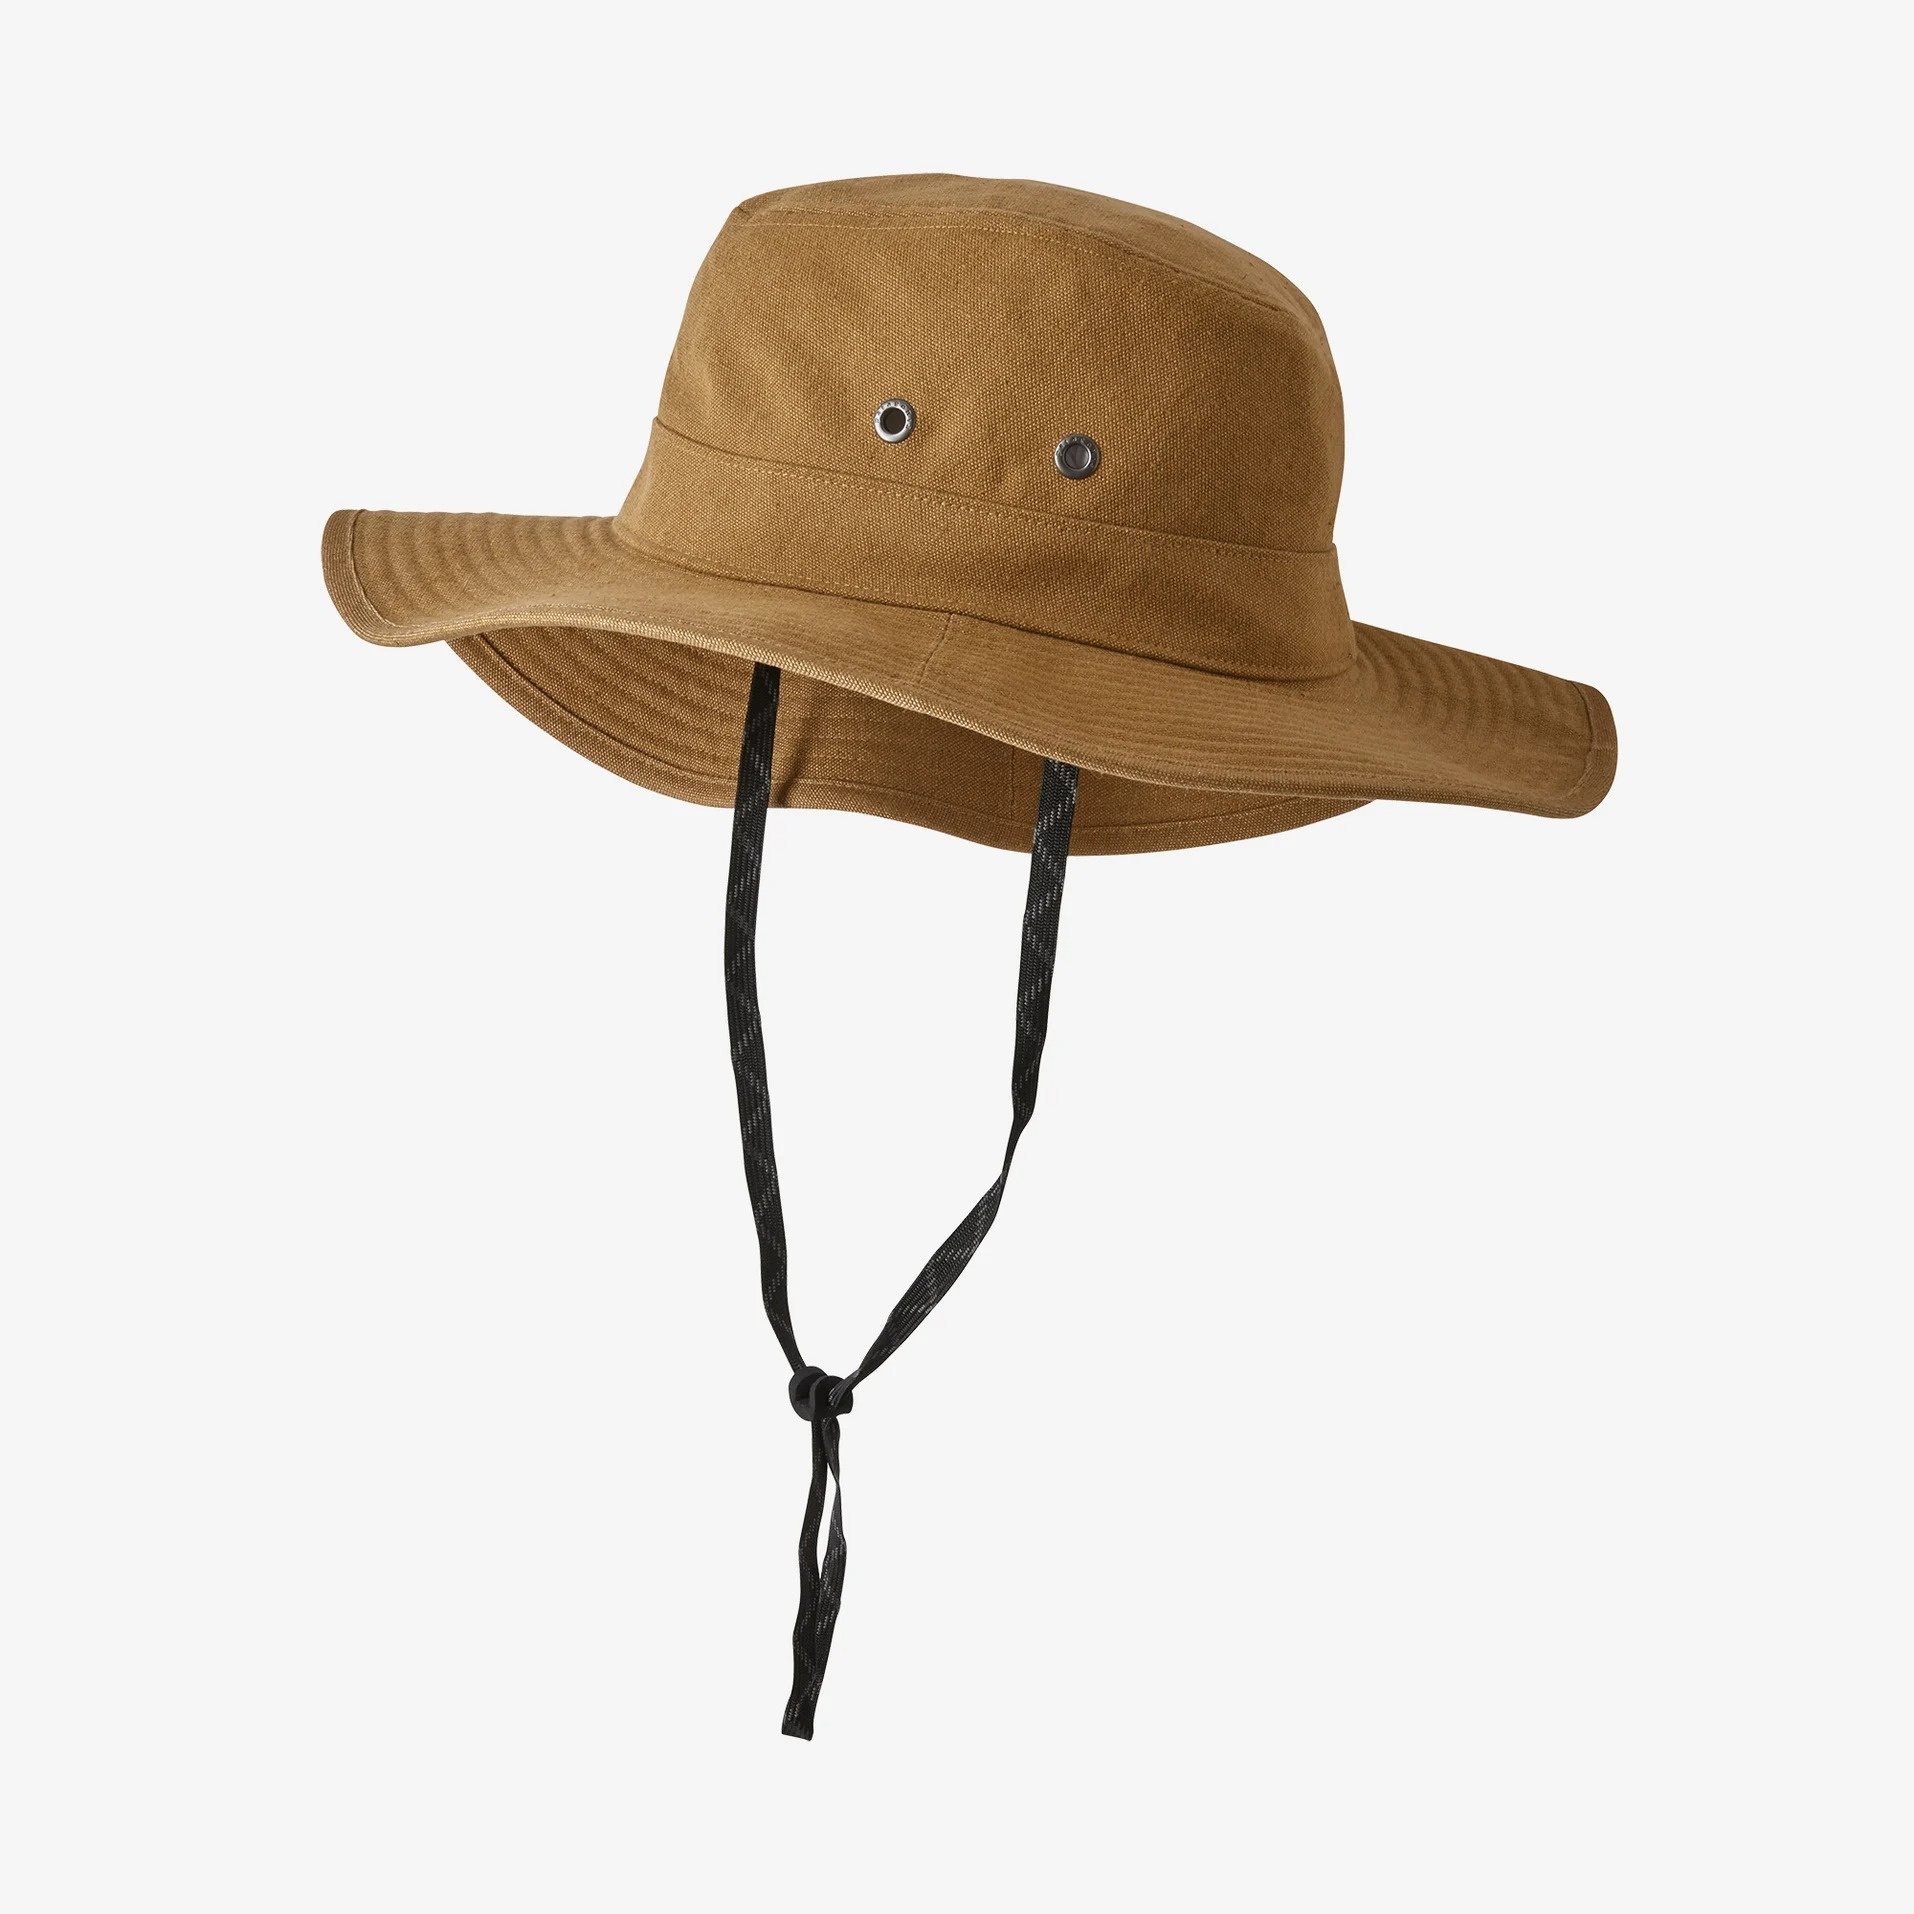 patagonia the forge hat - OFF-62% > Shipping free